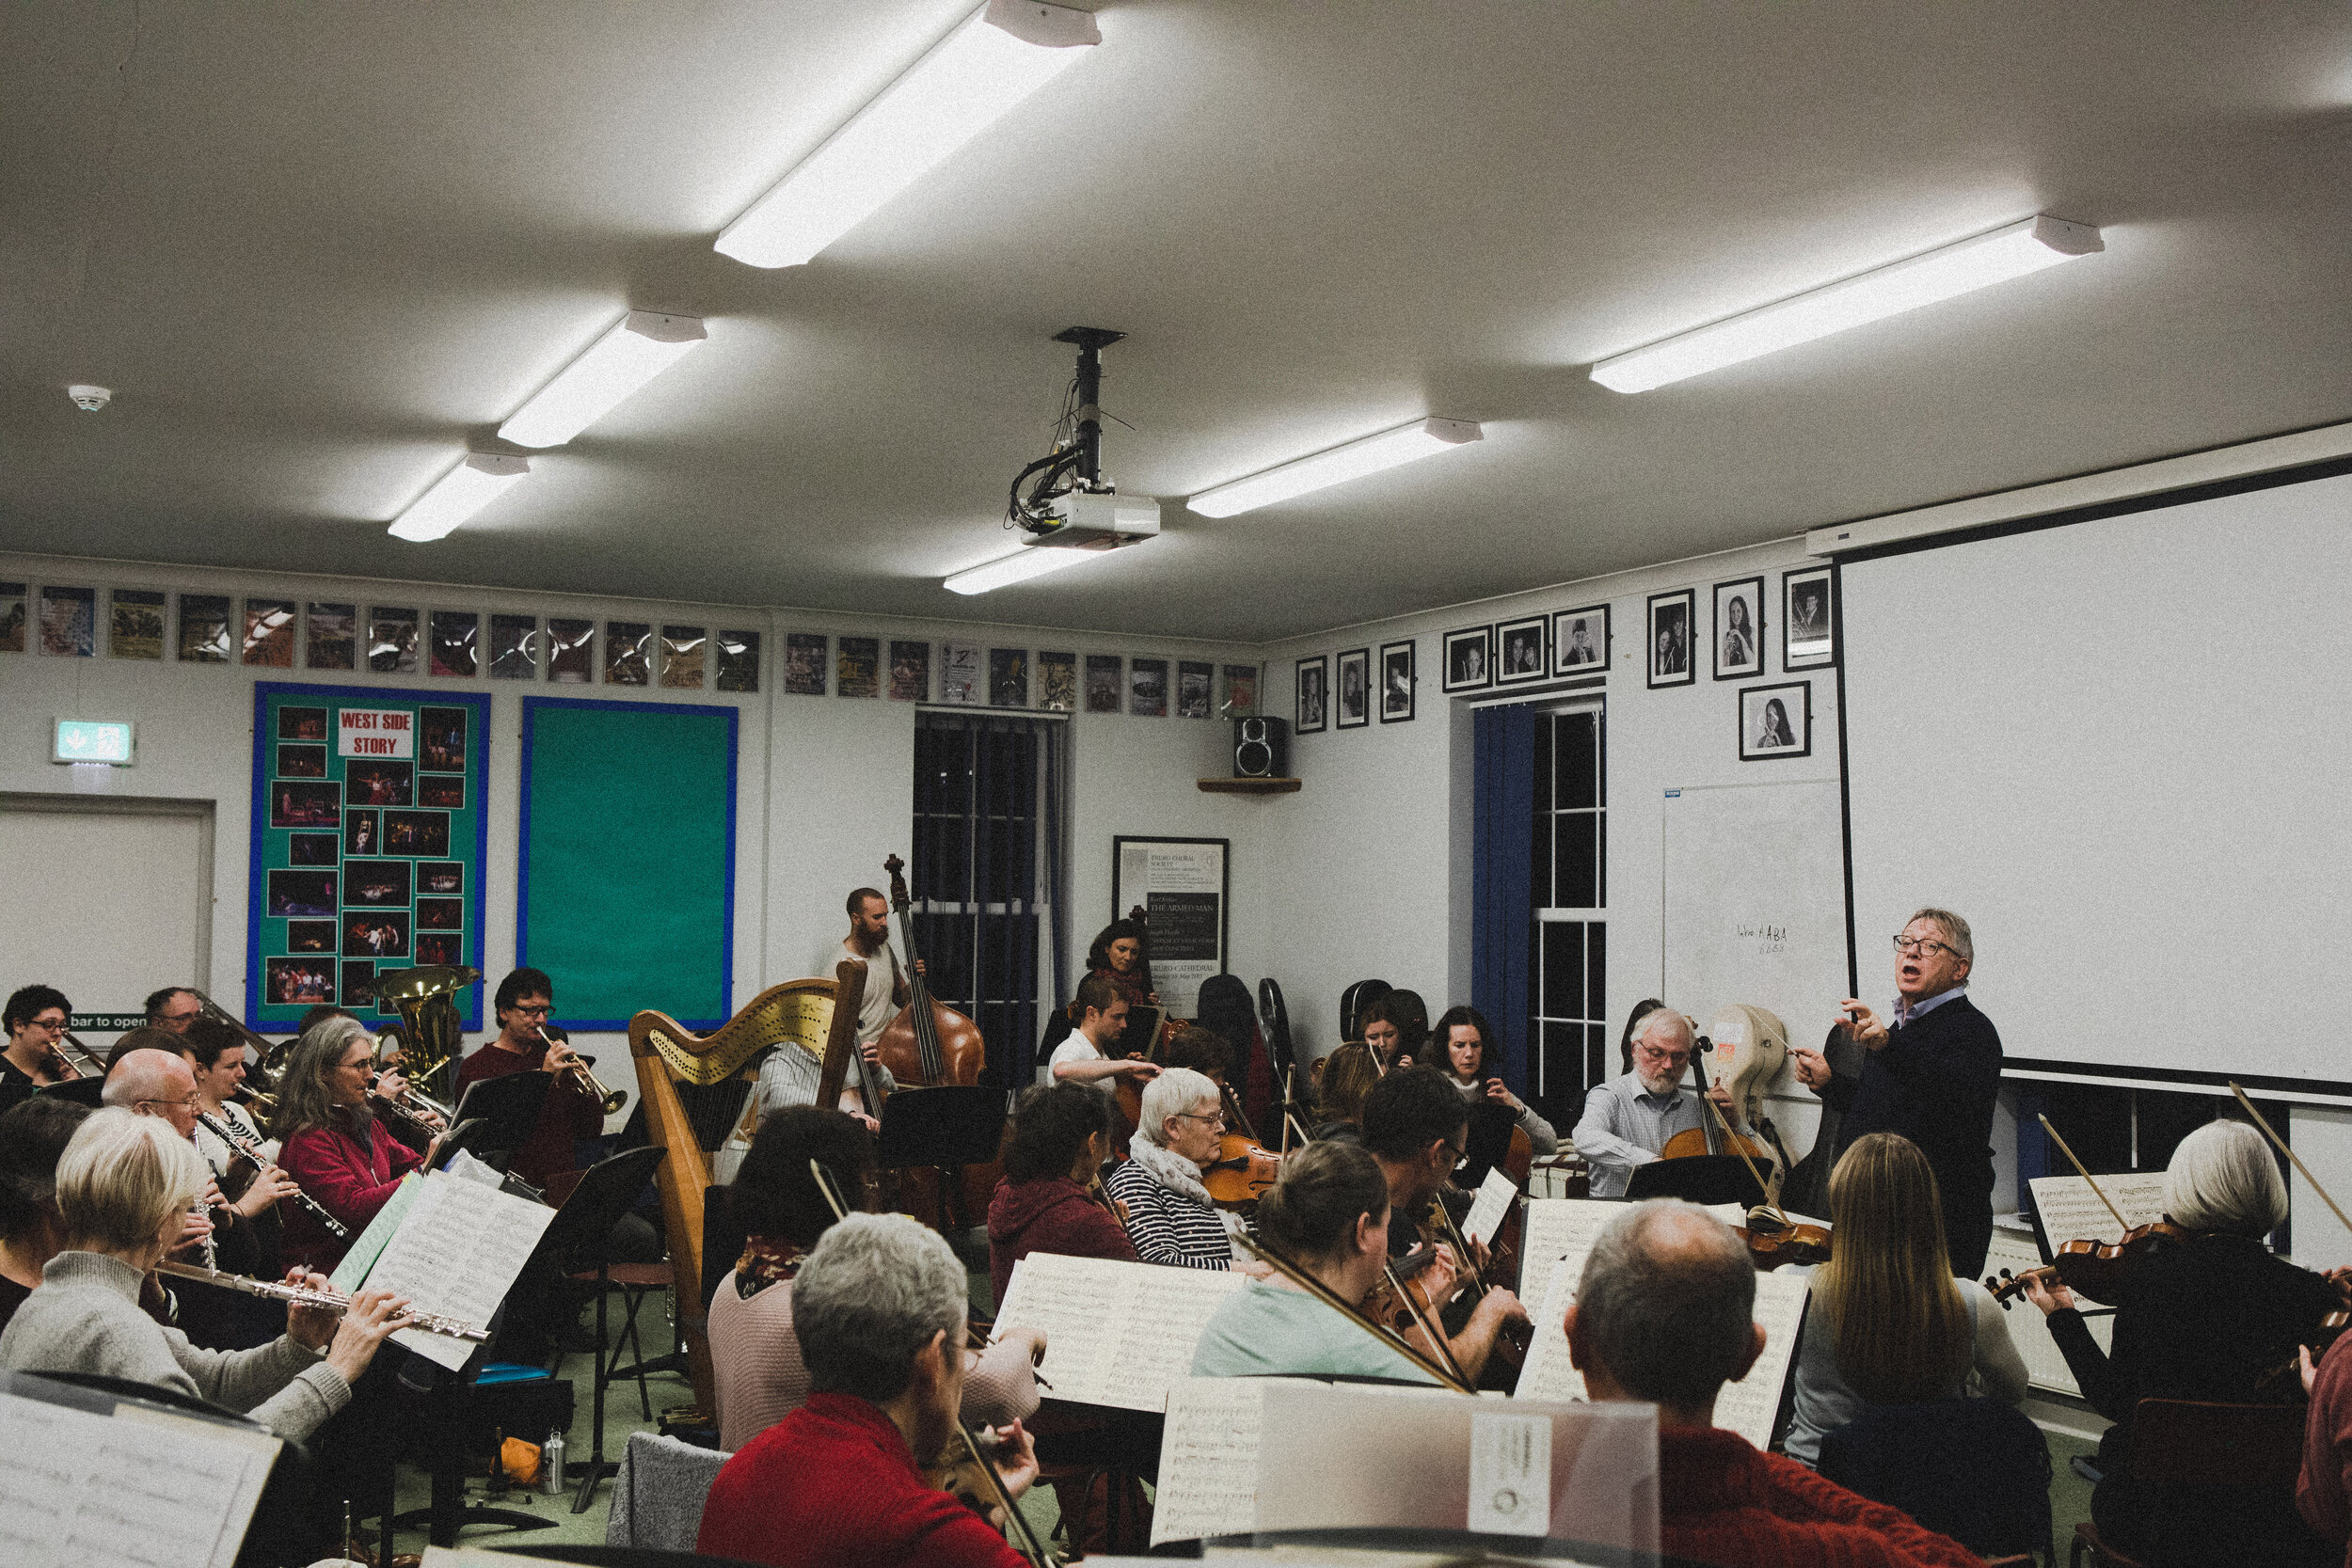 Cornwall Concert Orchestra